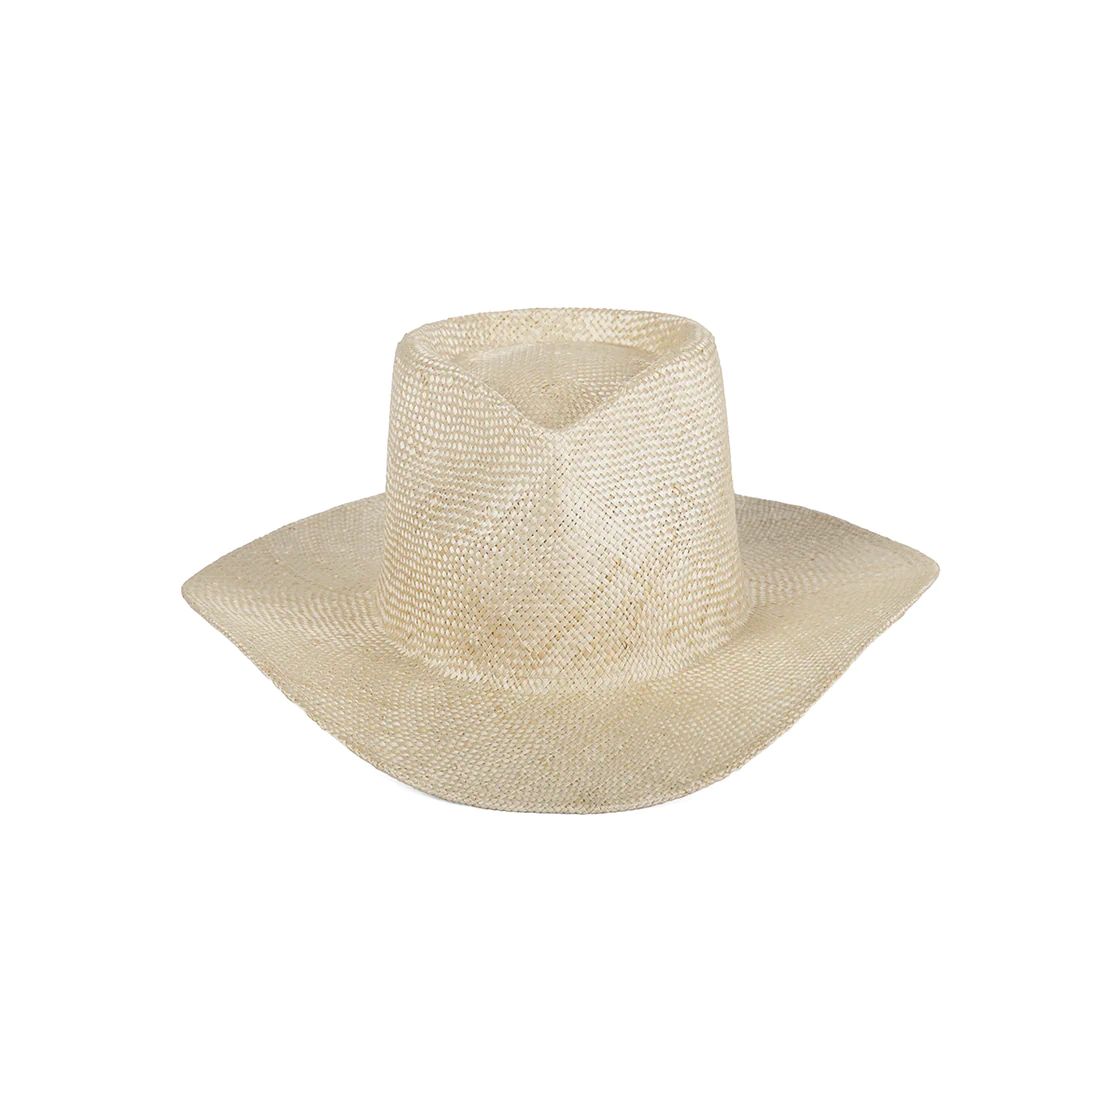 The Oasis - Straw Fedora Hat in White | Lack of Color US | Lack of Color